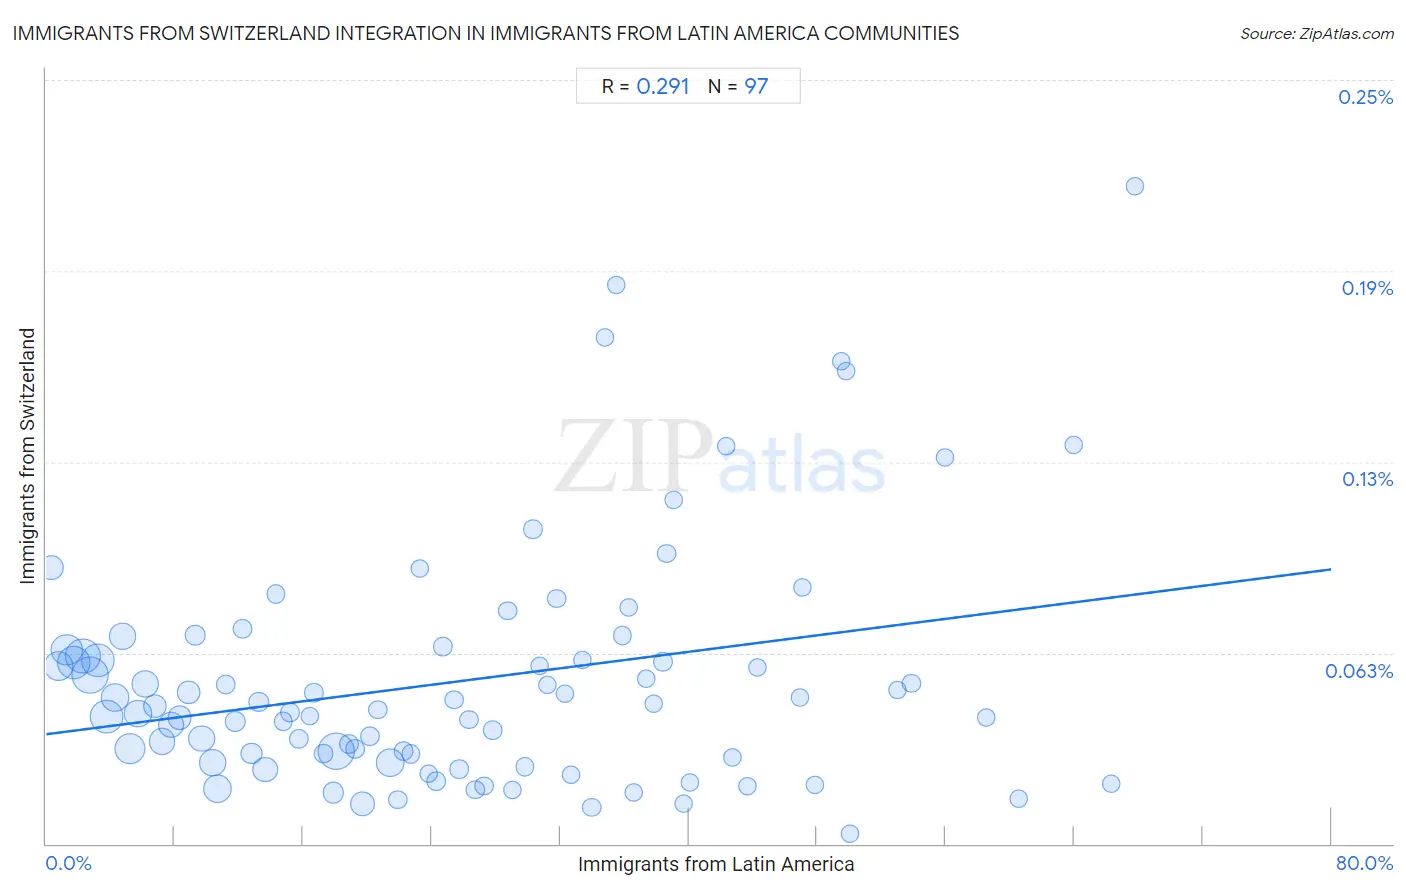 Immigrants from Latin America Integration in Immigrants from Switzerland Communities